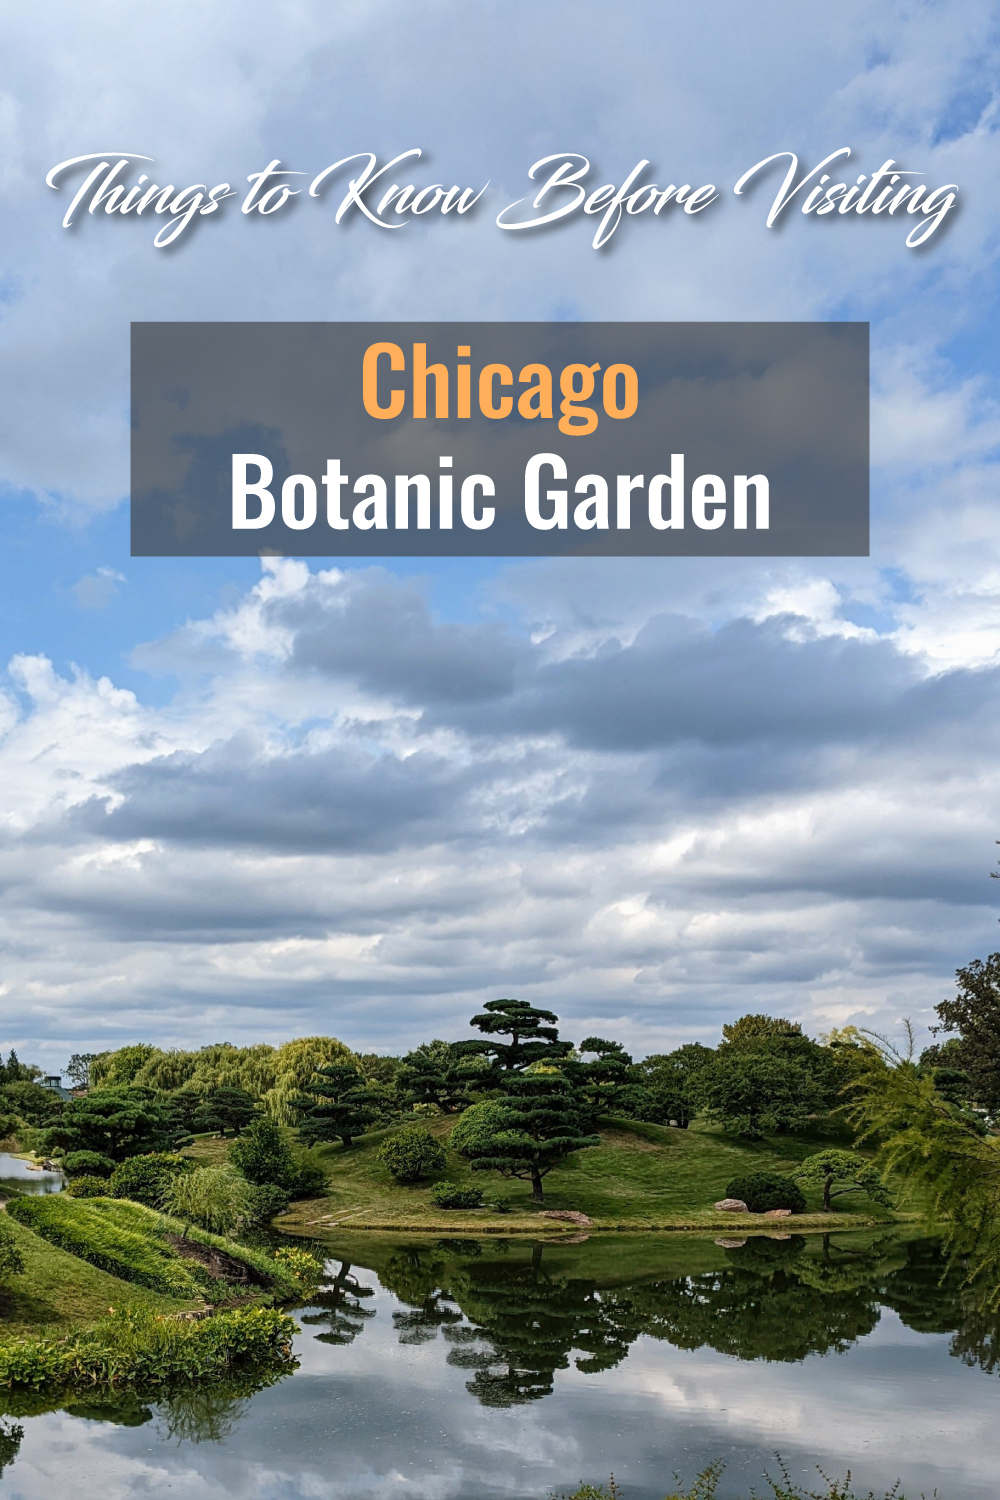 6 Things to Know Before Visiting Chicago Botanic Garden